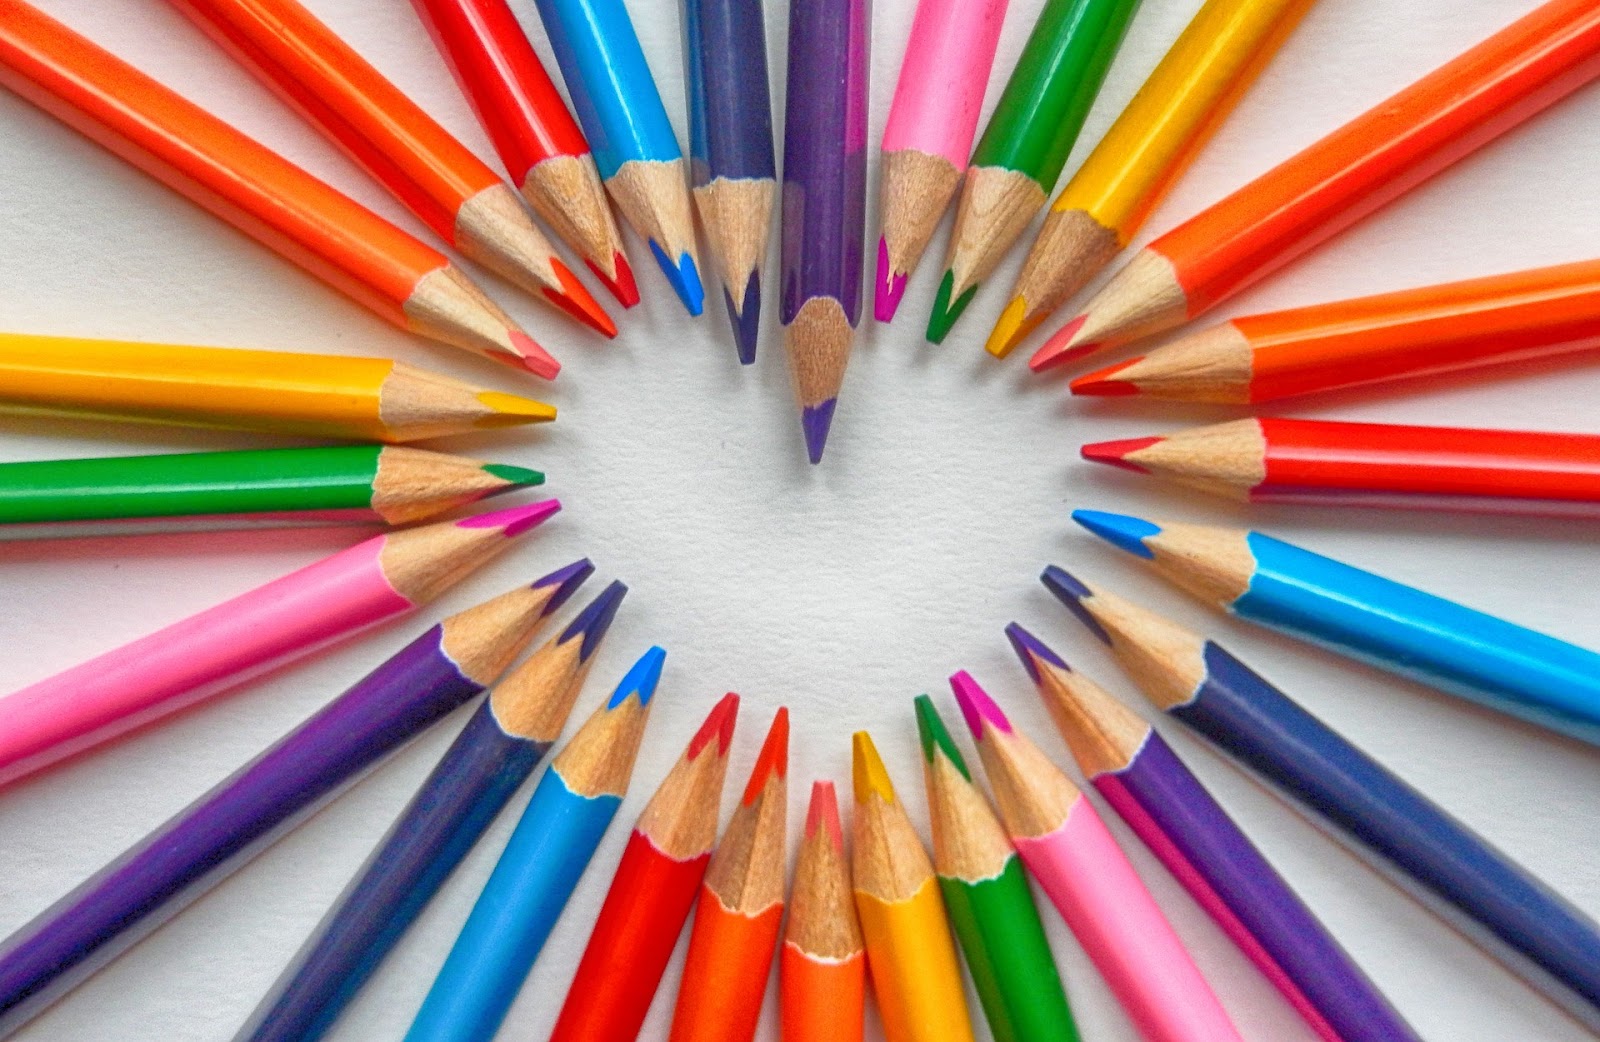 A picture of several colored pencils arranged to that the points form a heart.